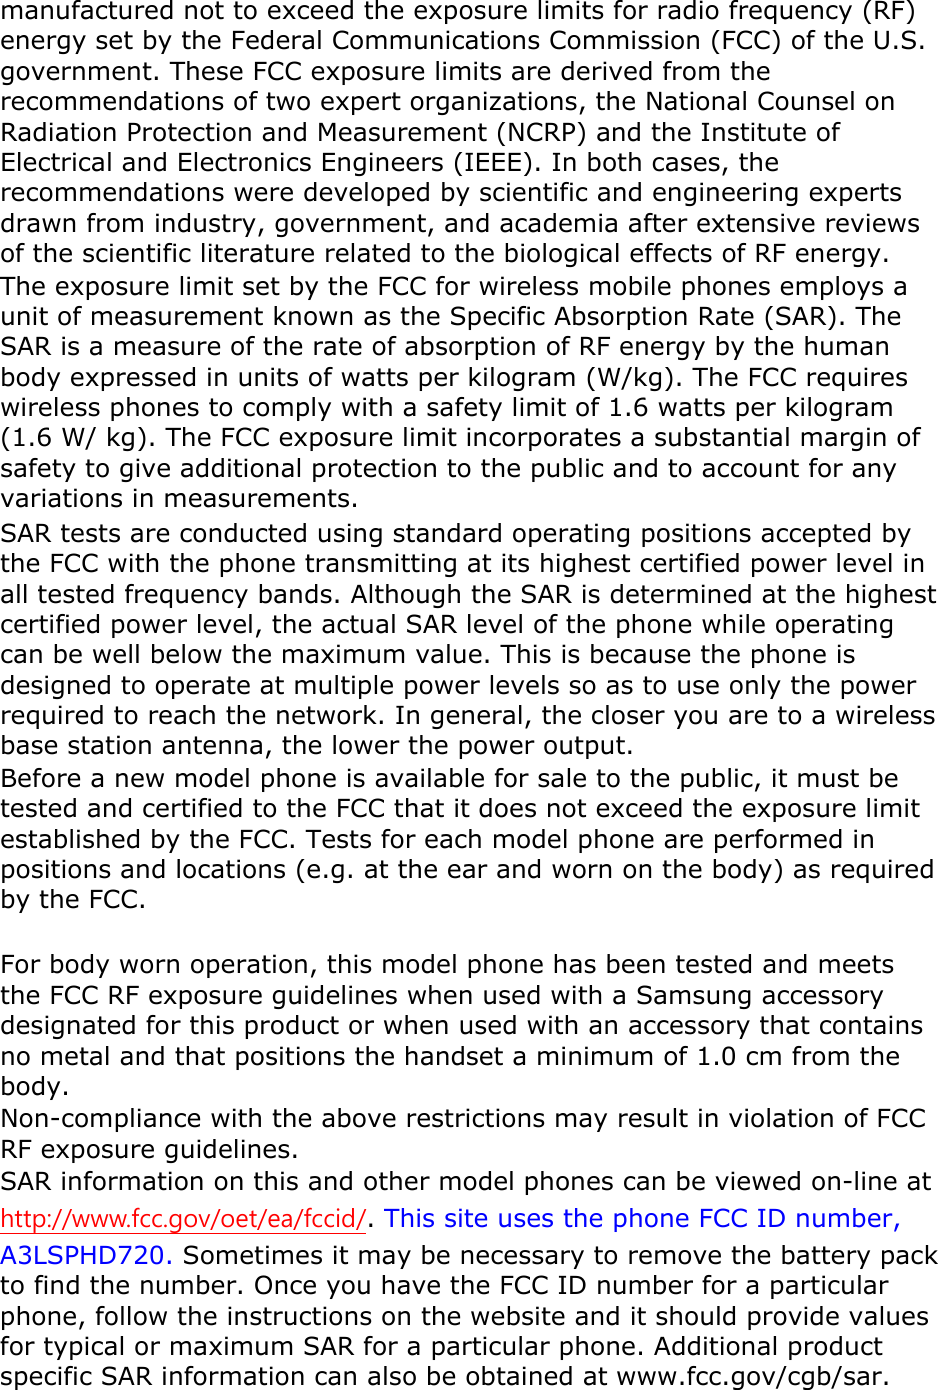 manufactured not to exceed the exposure limits for radio frequency (RF) energy set by the Federal Communications Commission (FCC) of the U.S. government. These FCC exposure limits are derived from the recommendations of two expert organizations, the National Counsel on Radiation Protection and Measurement (NCRP) and the Institute of Electrical and Electronics Engineers (IEEE). In both cases, the recommendations were developed by scientific and engineering experts drawn from industry, government, and academia after extensive reviews of the scientific literature related to the biological effects of RF energy. The exposure limit set by the FCC for wireless mobile phones employs a unit of measurement known as the Specific Absorption Rate (SAR). The SAR is a measure of the rate of absorption of RF energy by the human body expressed in units of watts per kilogram (W/kg). The FCC requires wireless phones to comply with a safety limit of 1.6 watts per kilogram (1.6 W/ kg). The FCC exposure limit incorporates a substantial margin of safety to give additional protection to the public and to account for any variations in measurements. SAR tests are conducted using standard operating positions accepted by the FCC with the phone transmitting at its highest certified power level in all tested frequency bands. Although the SAR is determined at the highest certified power level, the actual SAR level of the phone while operating can be well below the maximum value. This is because the phone is designed to operate at multiple power levels so as to use only the power required to reach the network. In general, the closer you are to a wireless base station antenna, the lower the power output. Before a new model phone is available for sale to the public, it must be tested and certified to the FCC that it does not exceed the exposure limit established by the FCC. Tests for each model phone are performed in positions and locations (e.g. at the ear and worn on the body) as required by the FCC.      For body worn operation, this model phone has been tested and meets the FCC RF exposure guidelines when used with a Samsung accessory designated for this product or when used with an accessory that contains no metal and that positions the handset a minimum of 1.0 cm from the body.  Non-compliance with the above restrictions may result in violation of FCC RF exposure guidelines. SAR information on this and other model phones can be viewed on-line at http://www.fcc.gov/oet/ea/fccid/. This site uses the phone FCC ID number, A3LSPHD720. Sometimes it may be necessary to remove the battery pack to find the number. Once you have the FCC ID number for a particular phone, follow the instructions on the website and it should provide values for typical or maximum SAR for a particular phone. Additional product specific SAR information can also be obtained at www.fcc.gov/cgb/sar. 